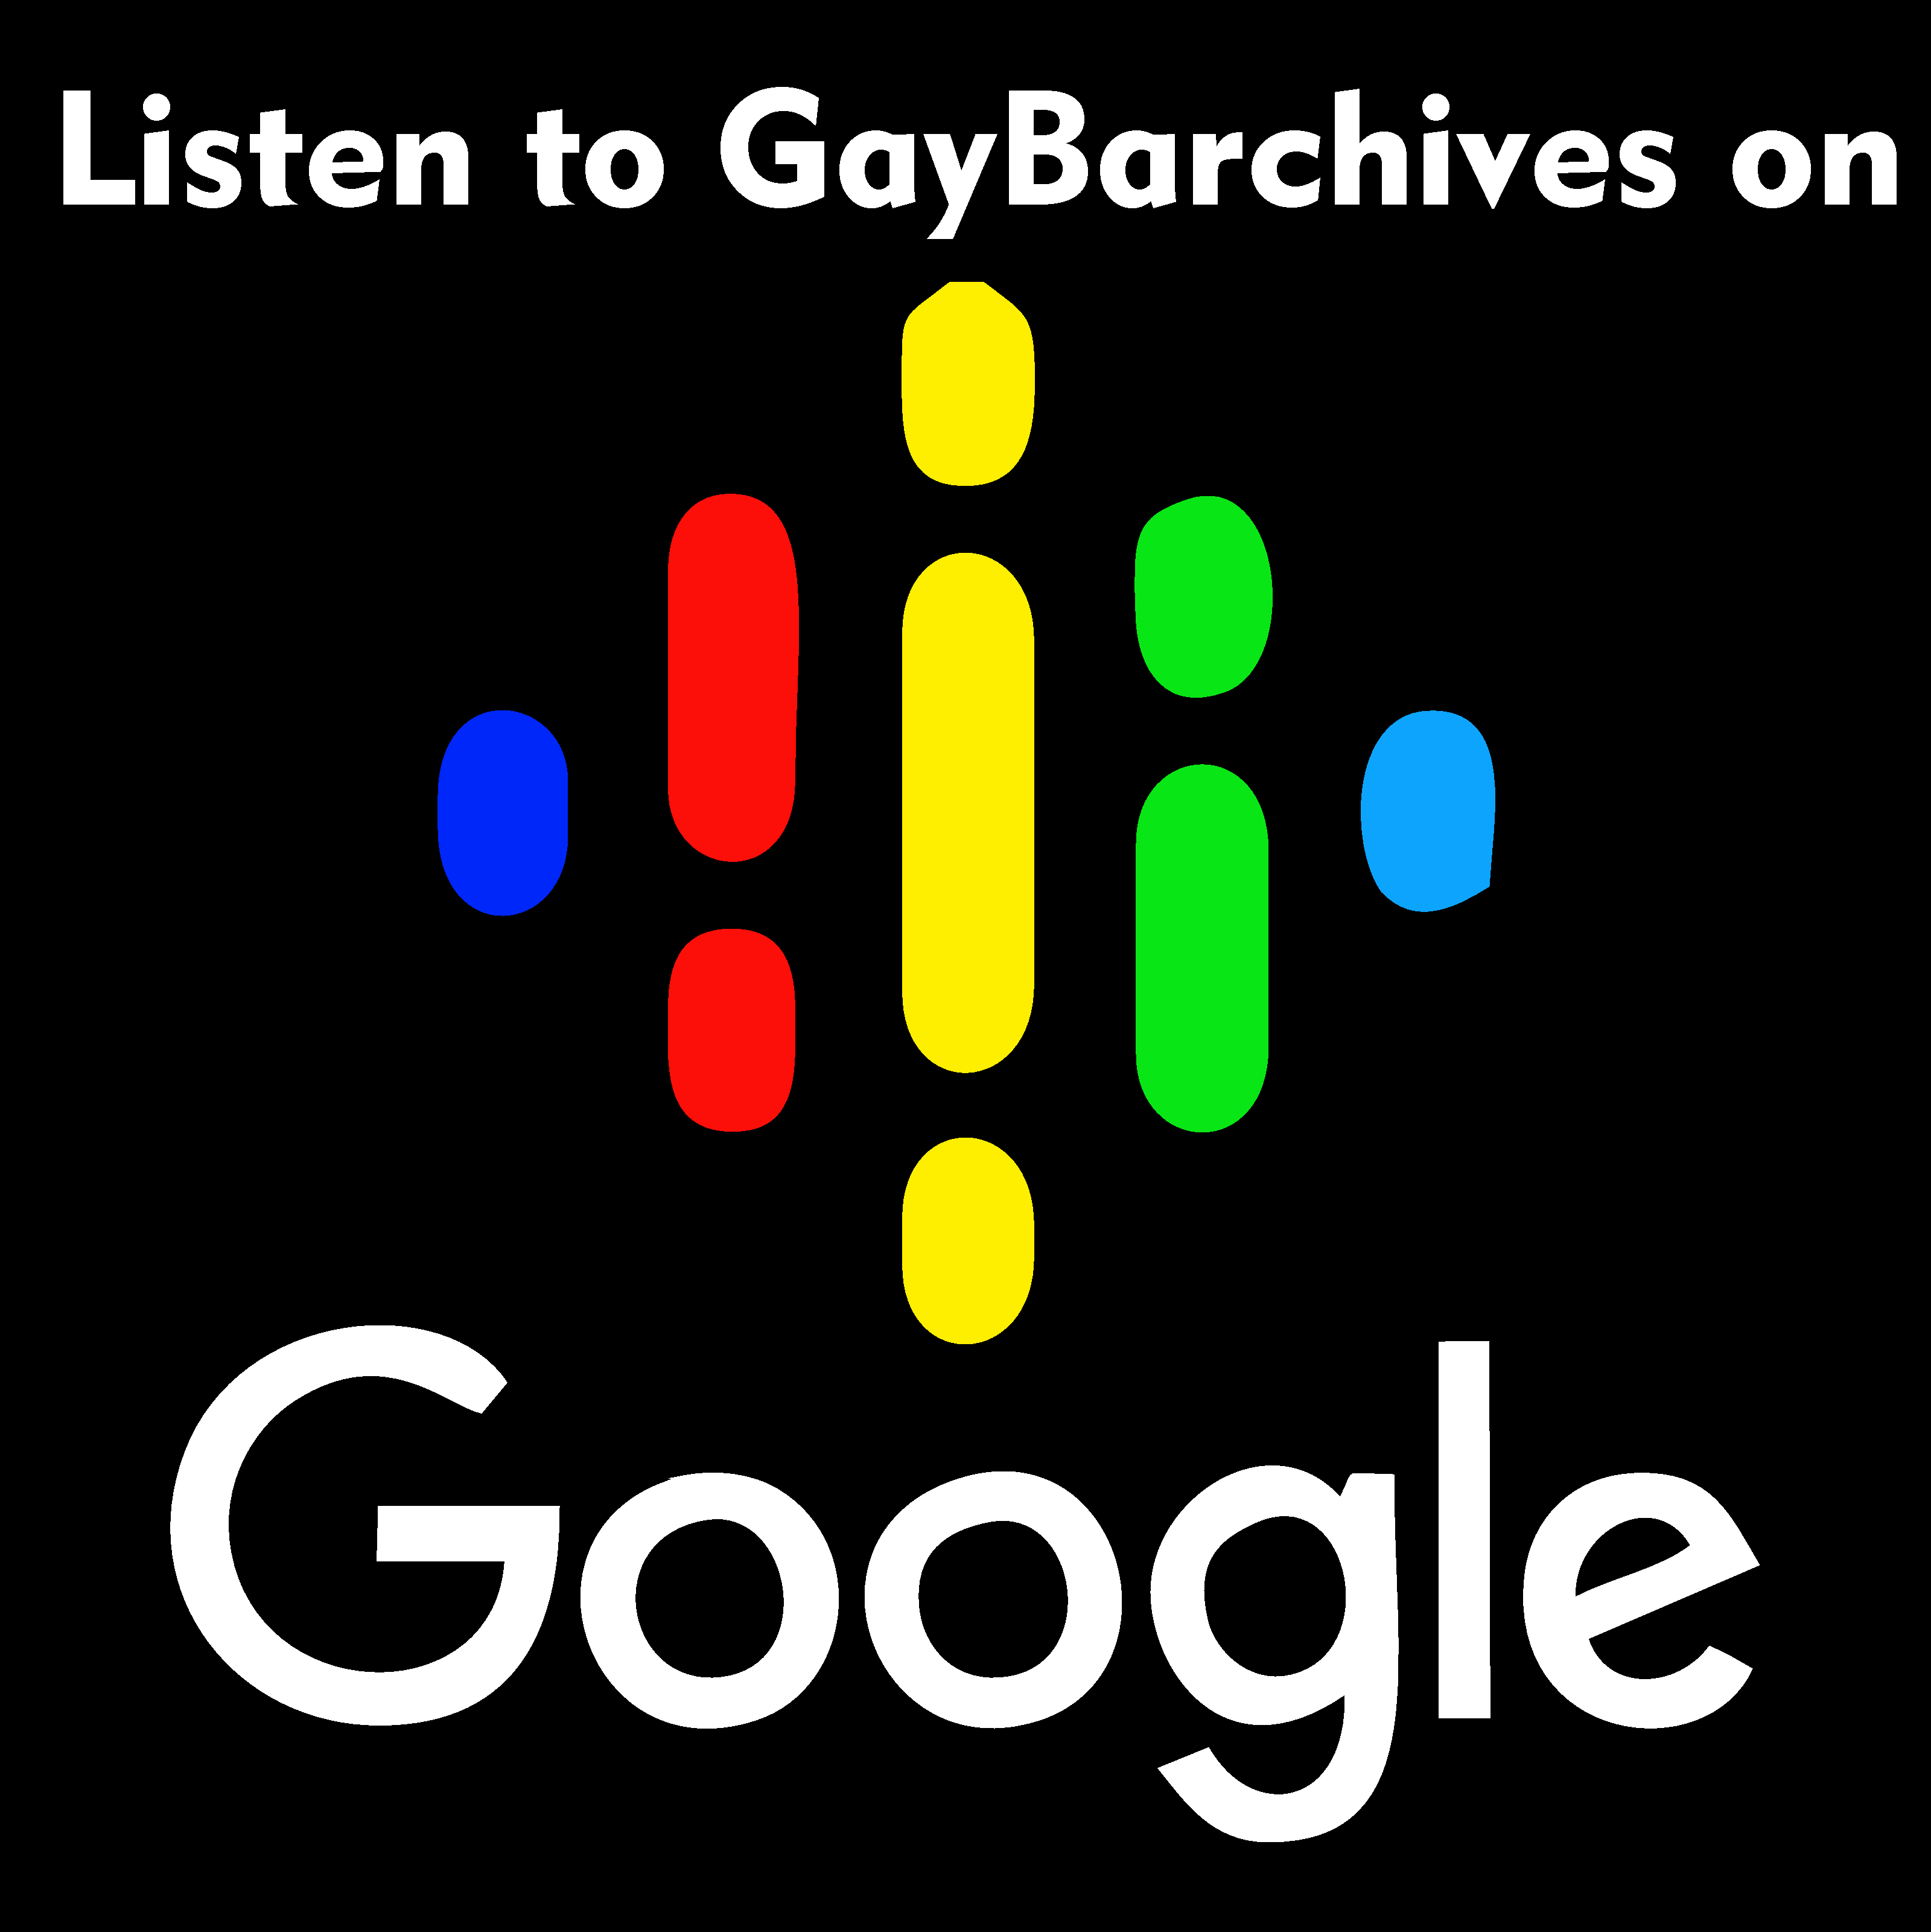 Click this icon to listen to the Gay Barchives podcast on  GOOGLE